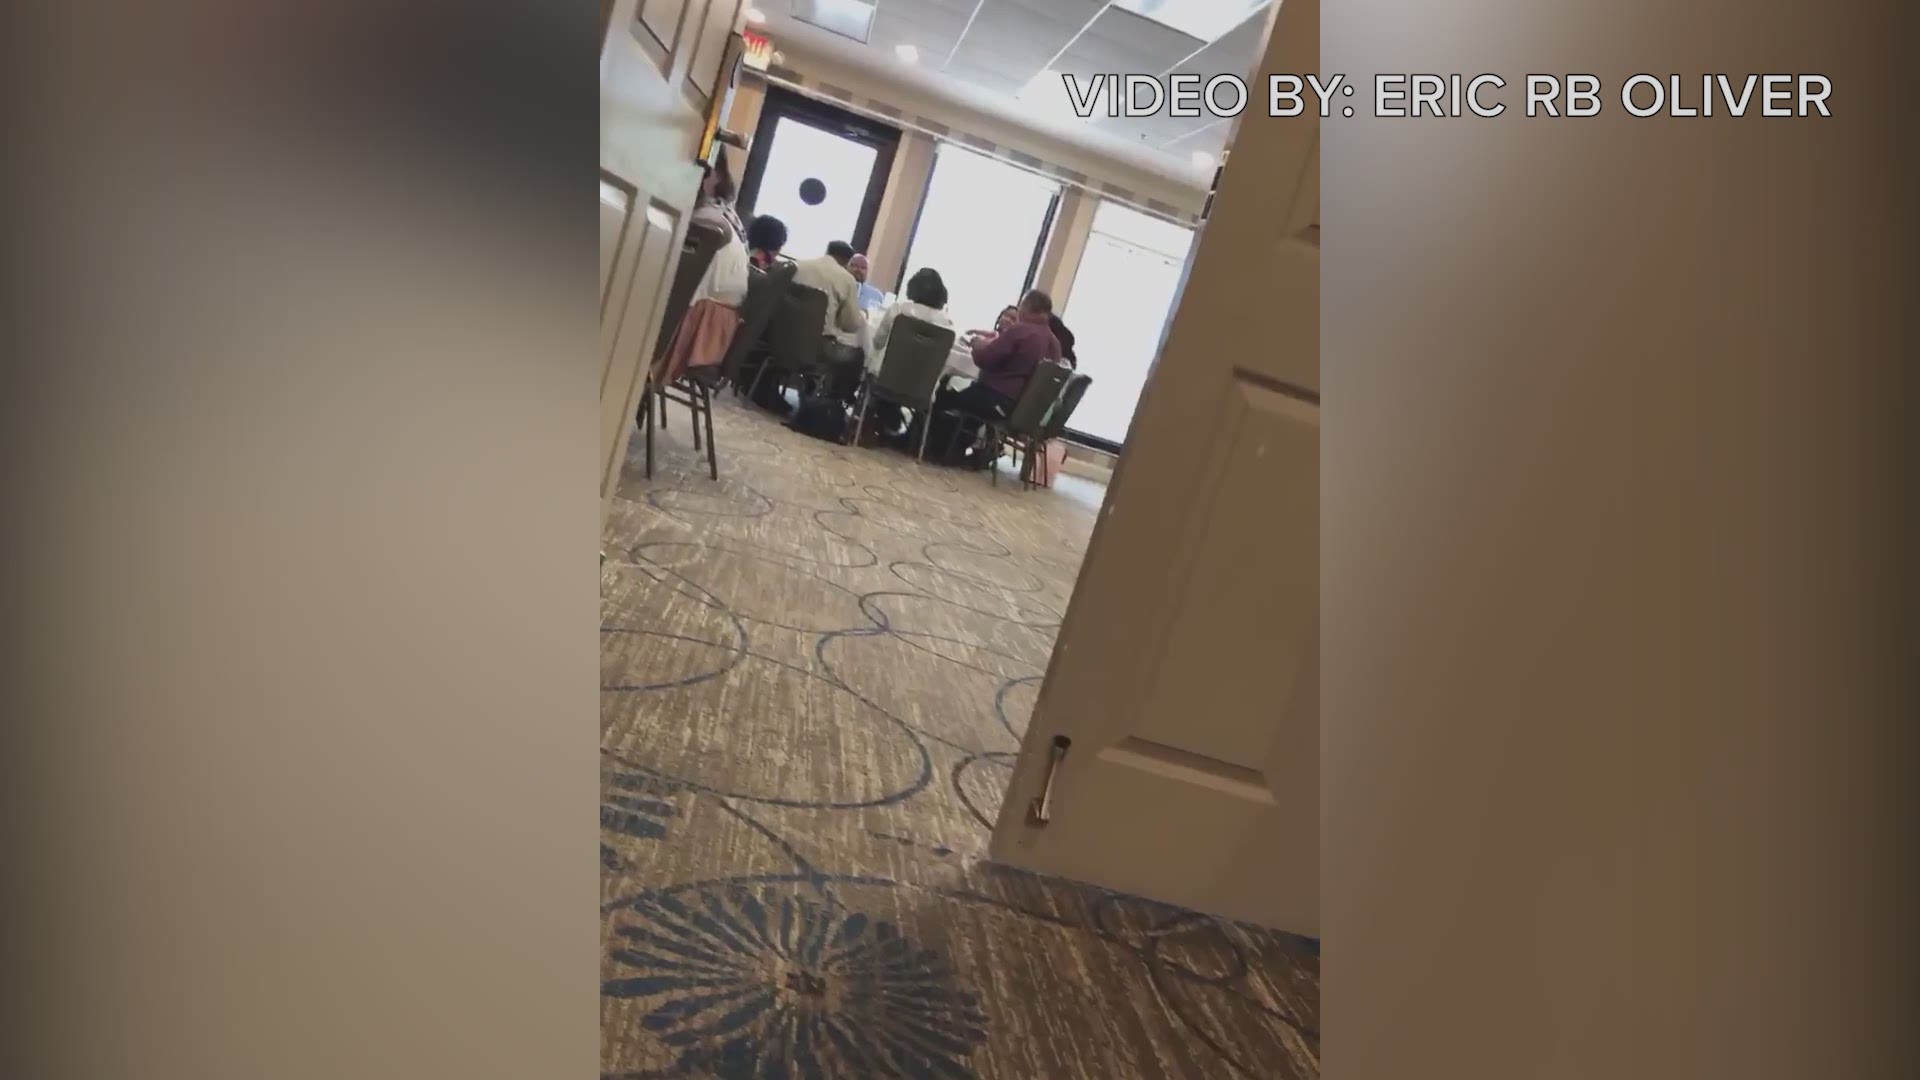 A customer at Ruth's Chris Steak House shot this video Sunday of servers bringing food to patrons in a Double Tree Hotel banquet room in downtown Jacksonville.